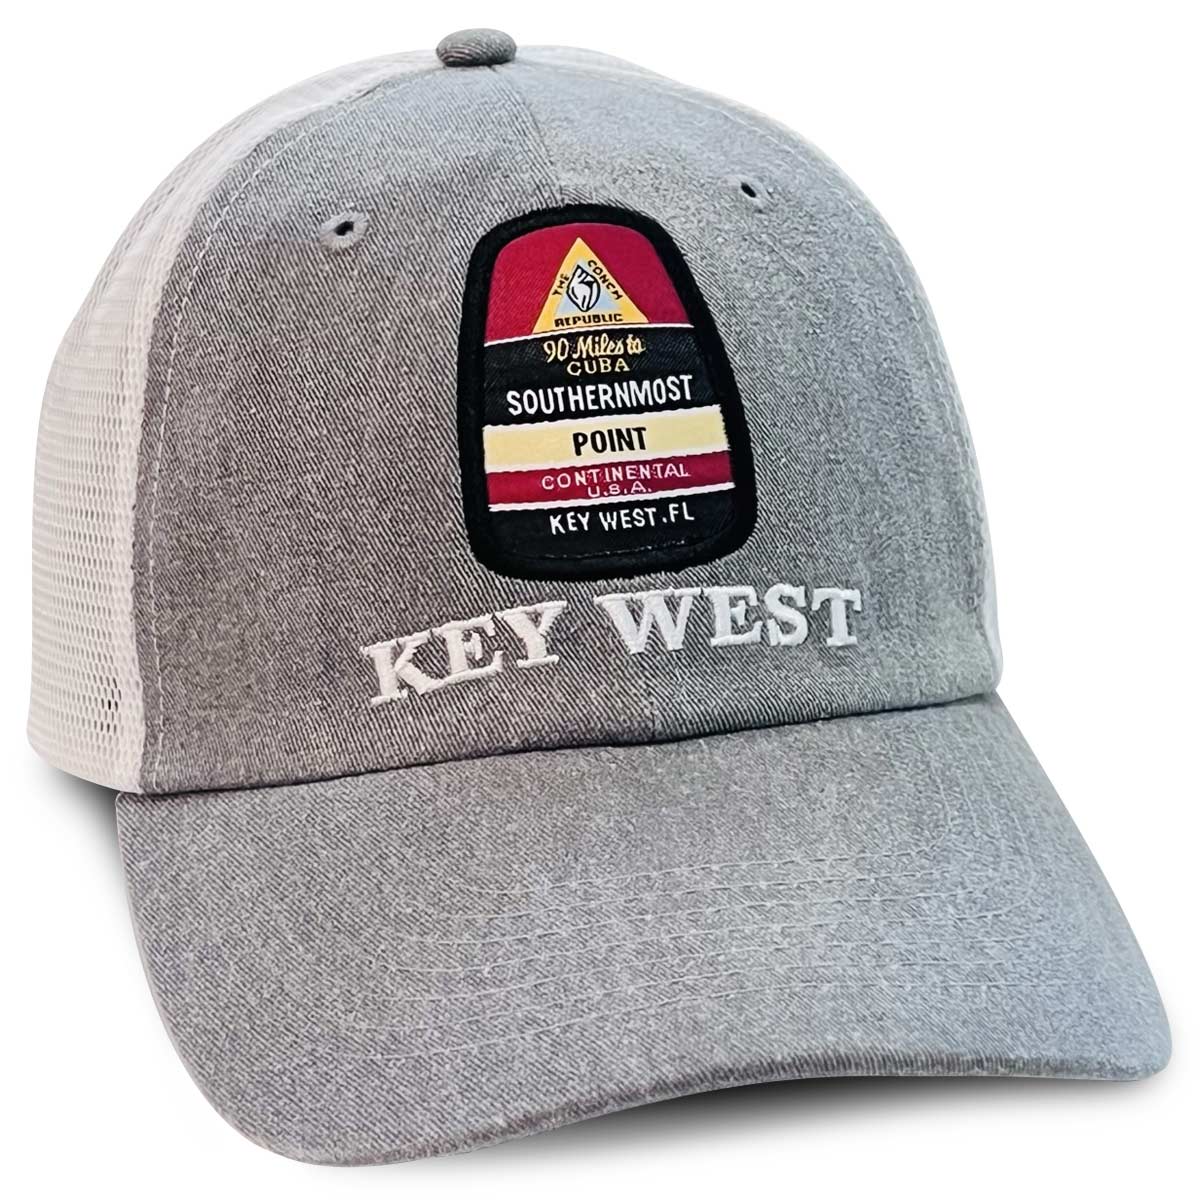 Key West Southernmost Point Embroidered Mesh Hat